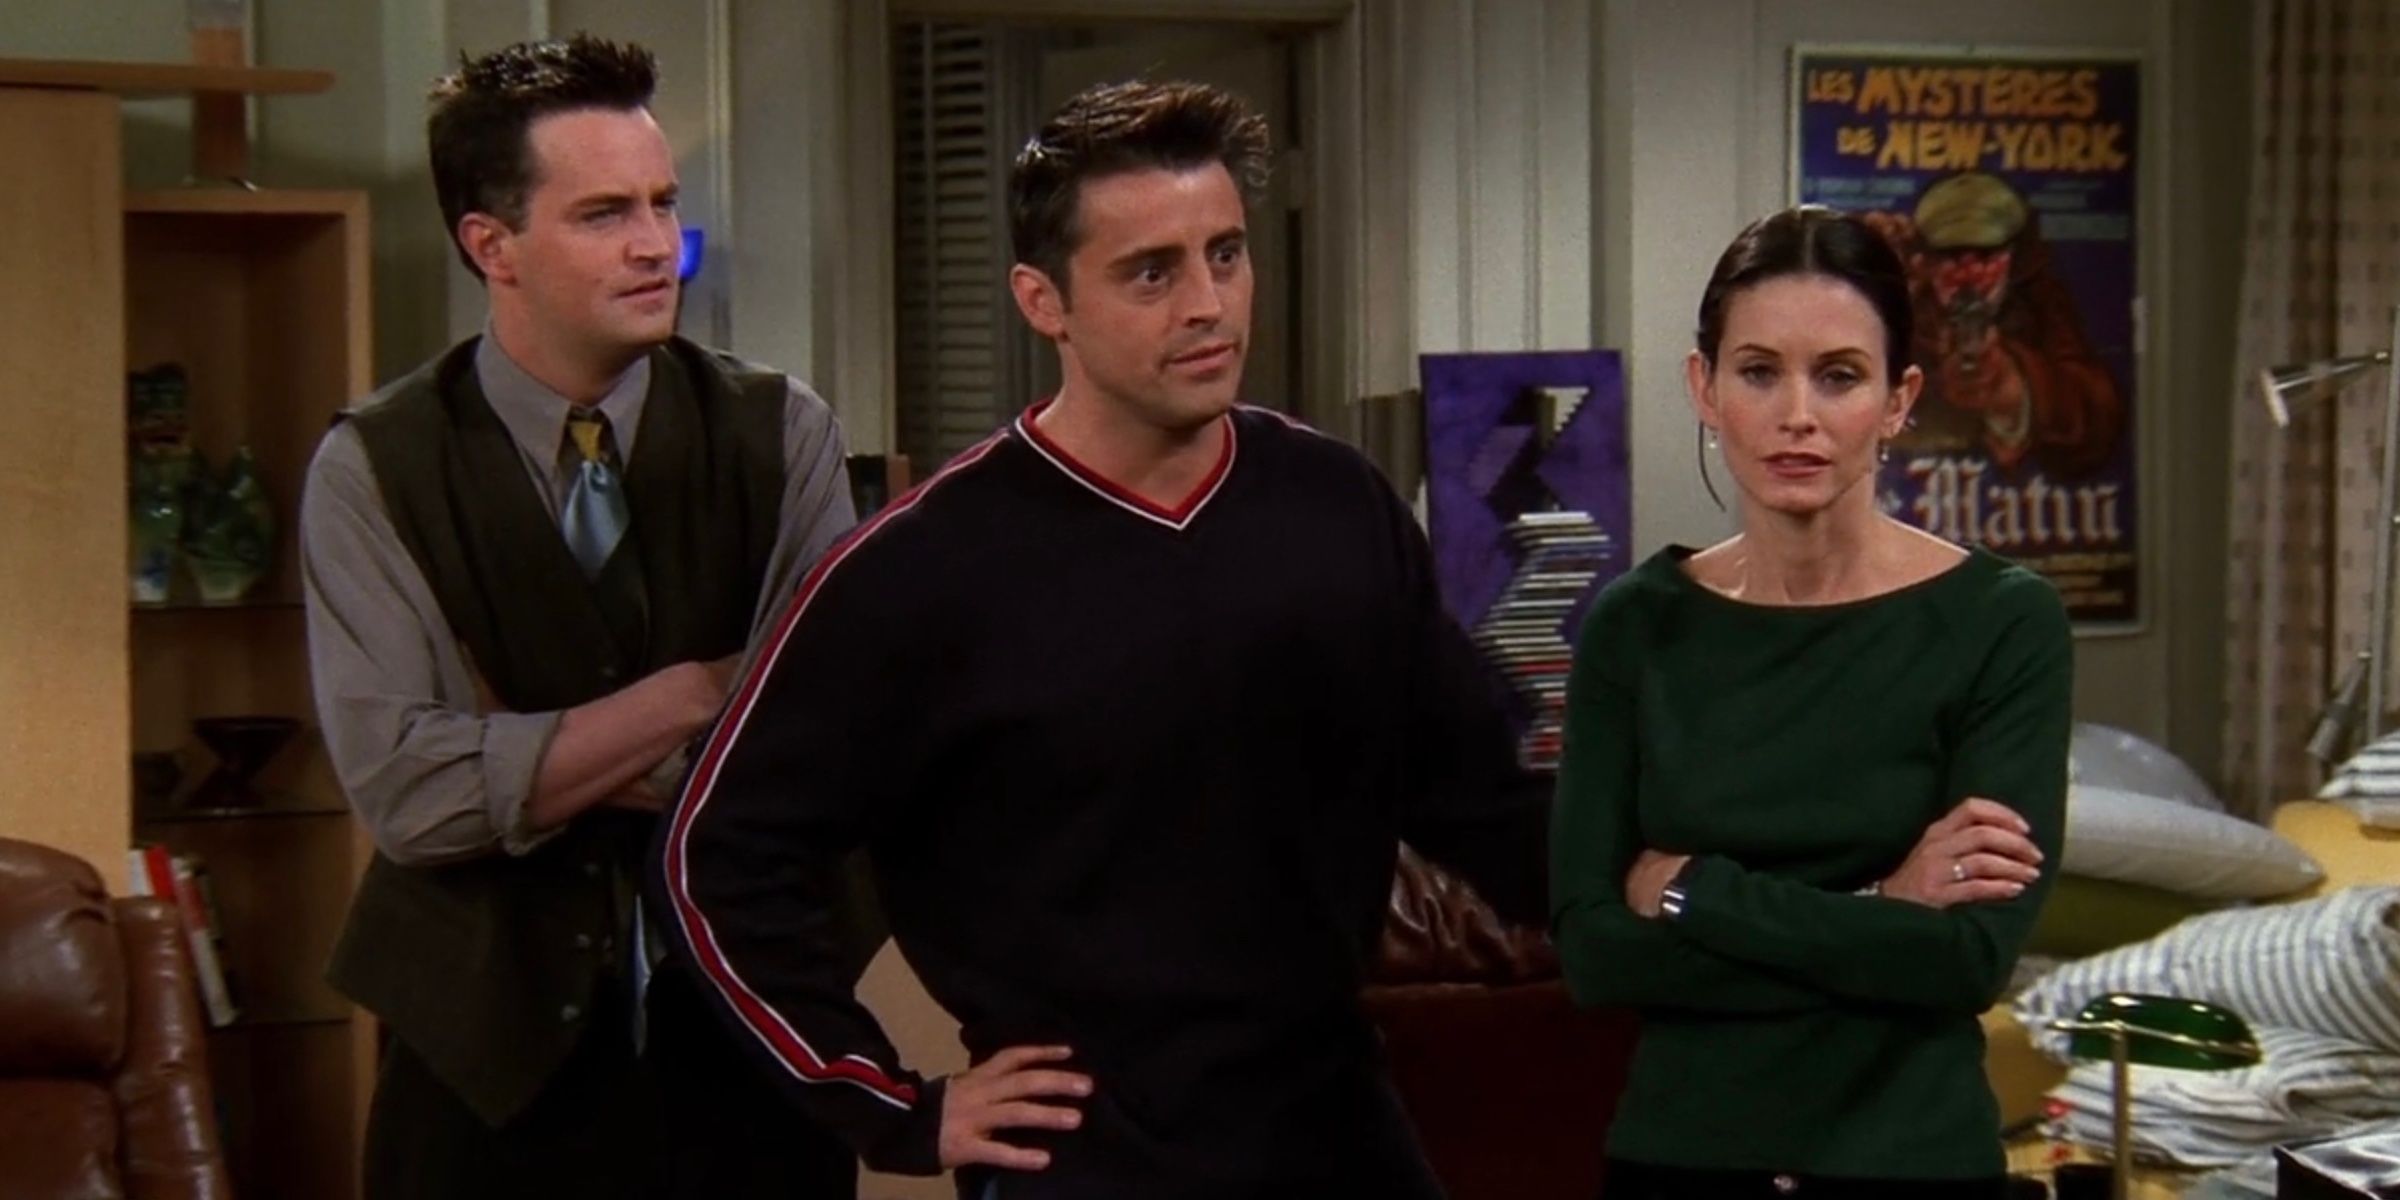 Joey is forced to lie to cover up Monica and Chandler's relationship